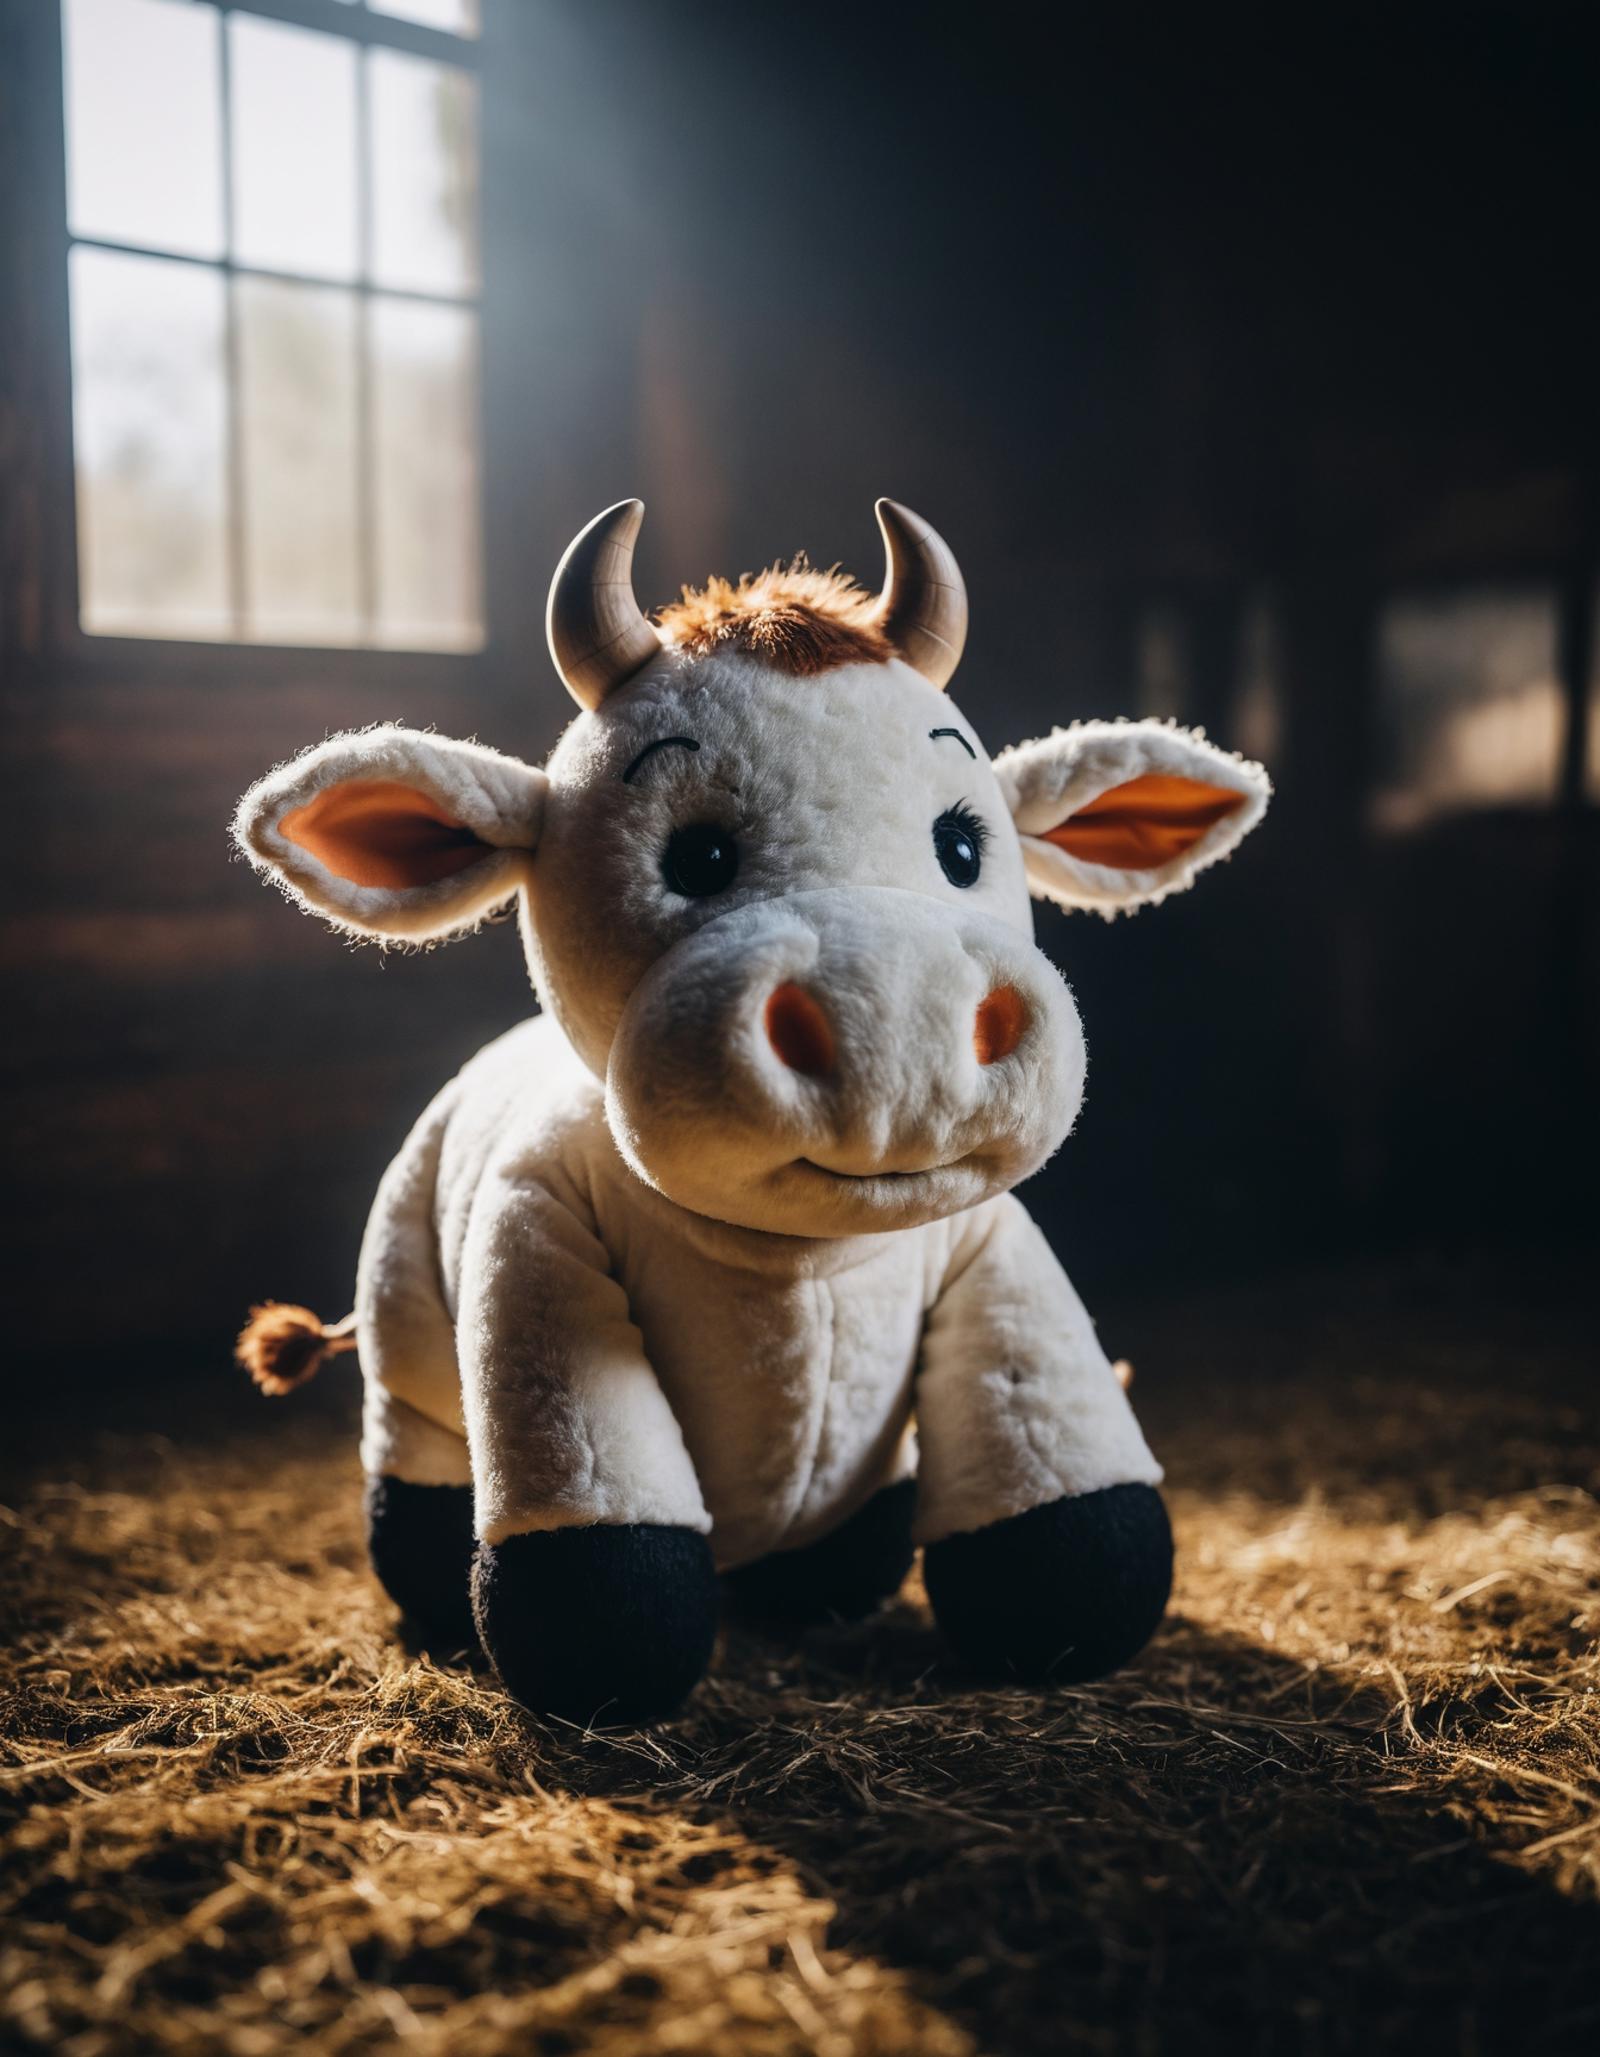 A white and brown stuffed toy cow sitting in hay.